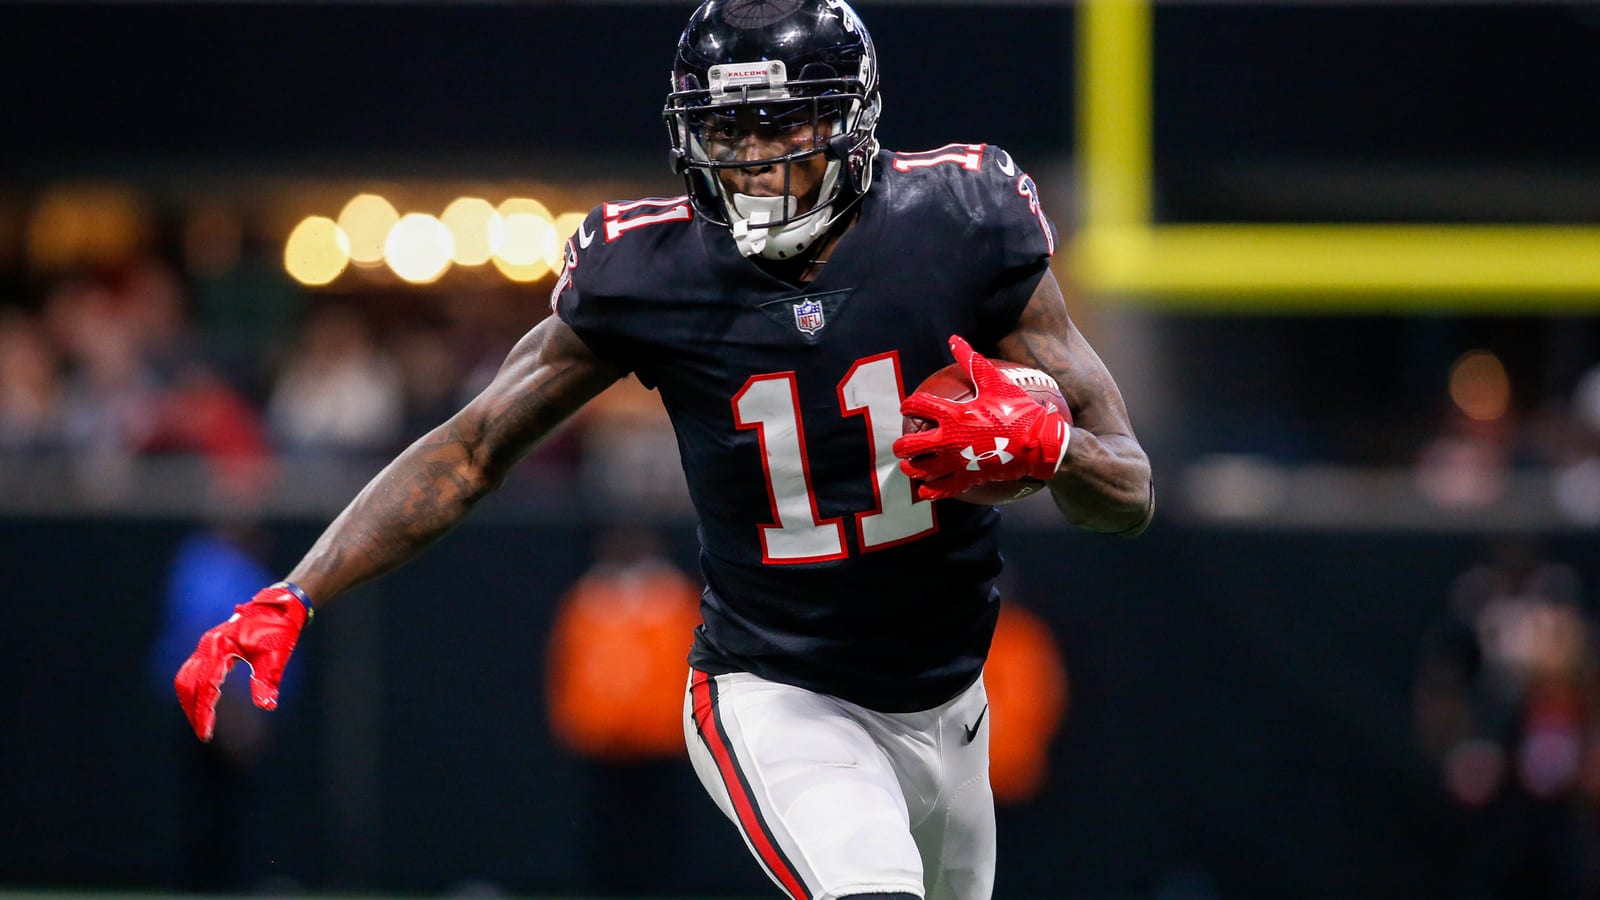 Crazy stat shows how insanely good Julio Jones is